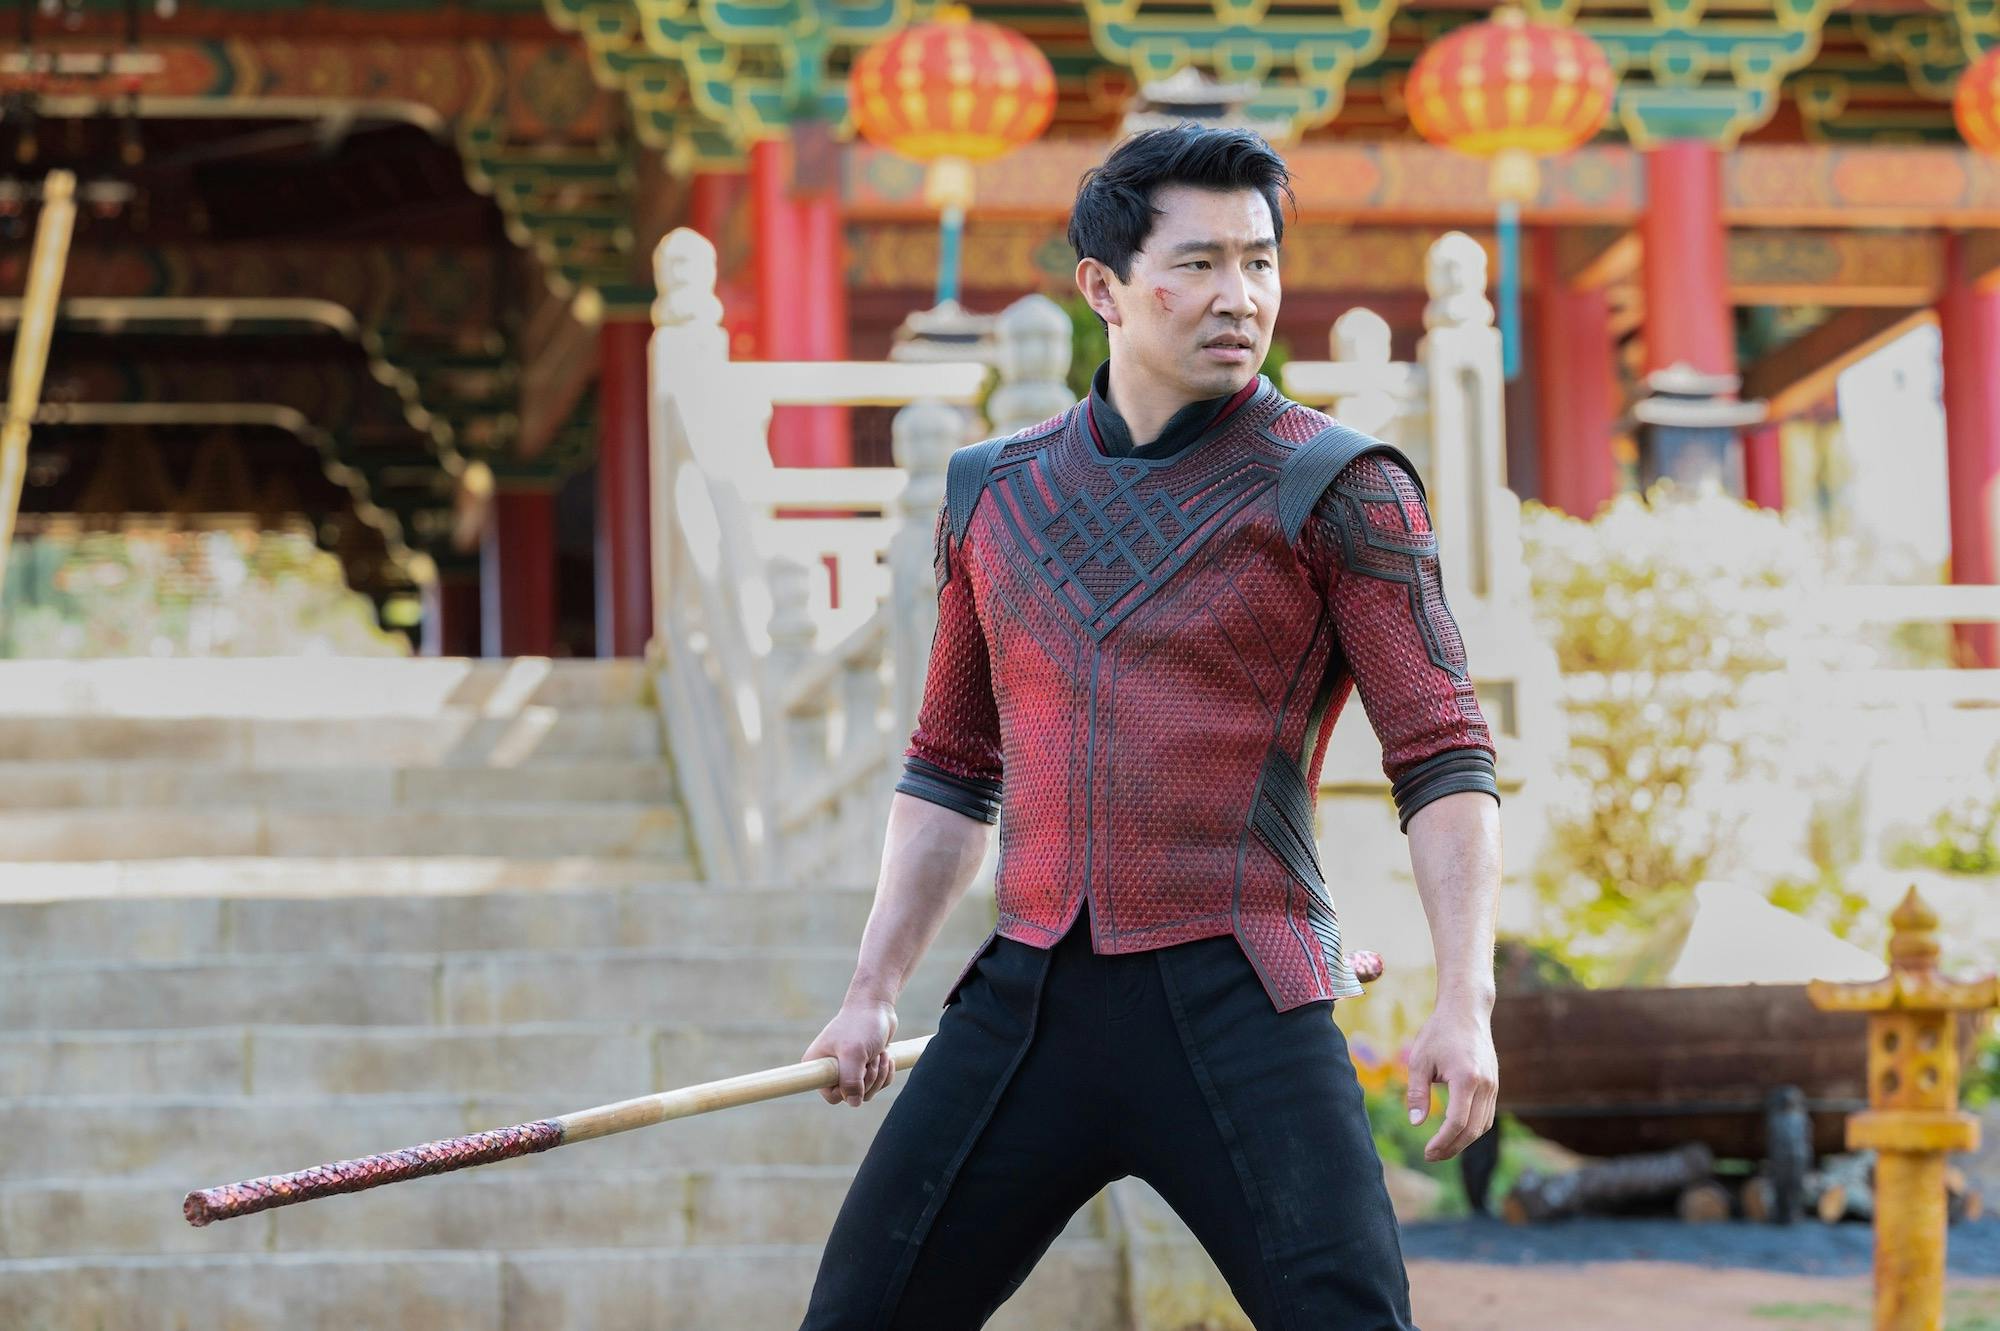 shang-chi holding a weapon